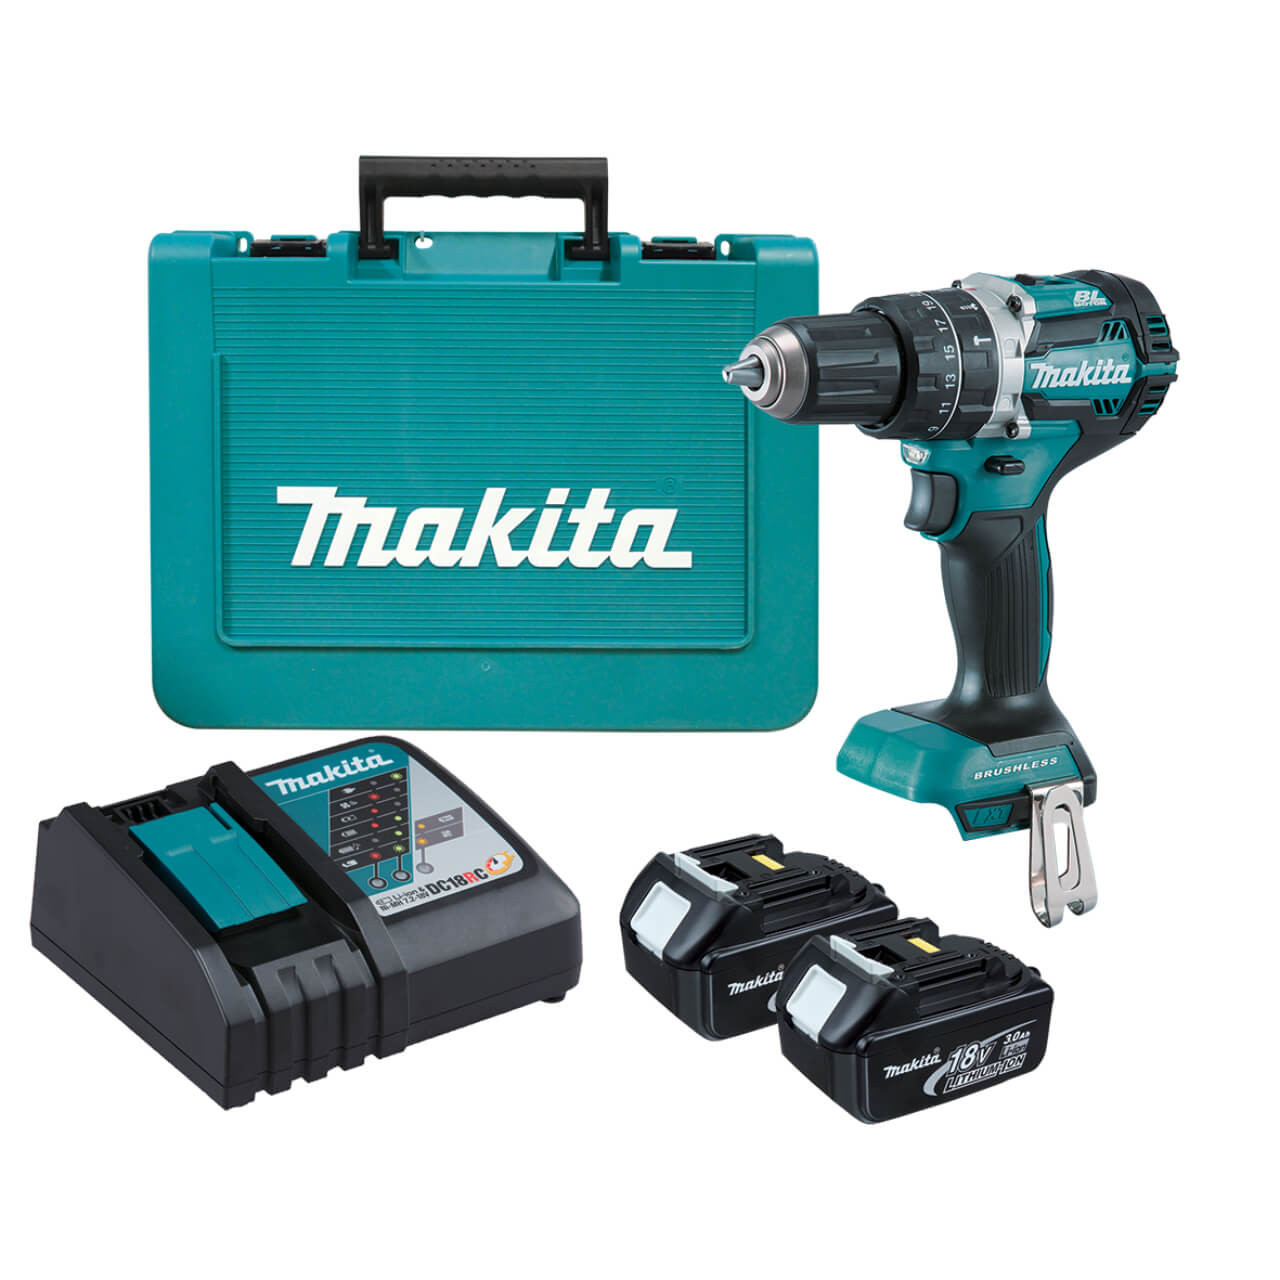 Makita 18V COMPACT BRUSHLESS Heavy Duty Hammer Driver Drill Kit - Includes 2 x 3.0Ah Batteries. Charger & Carry Case